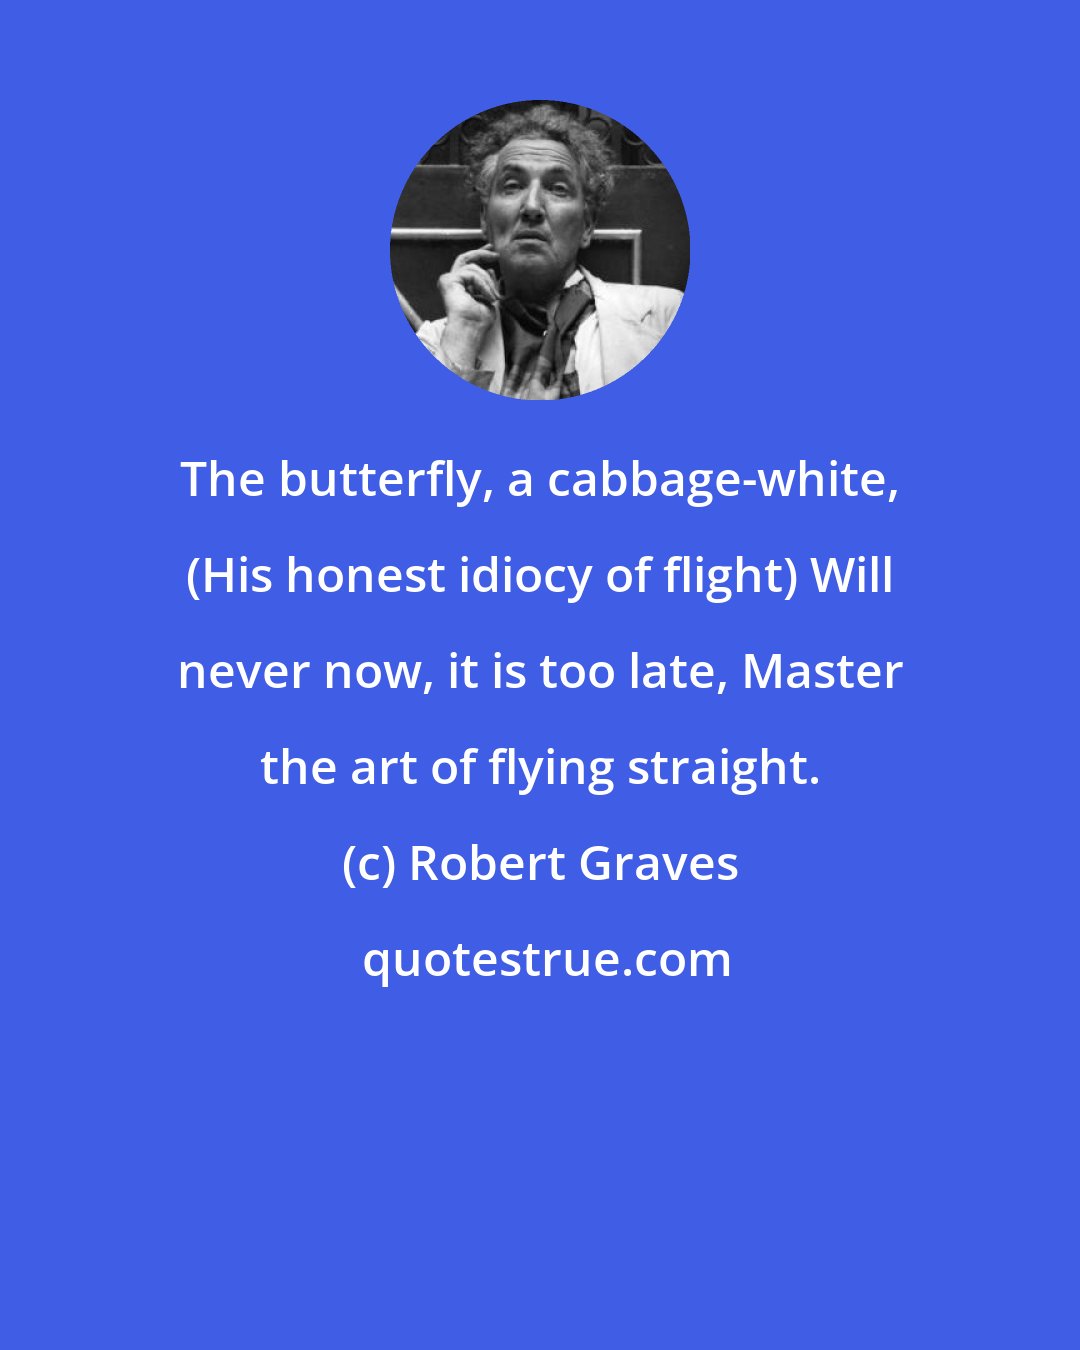 Robert Graves: The butterfly, a cabbage-white, (His honest idiocy of flight) Will never now, it is too late, Master the art of flying straight.